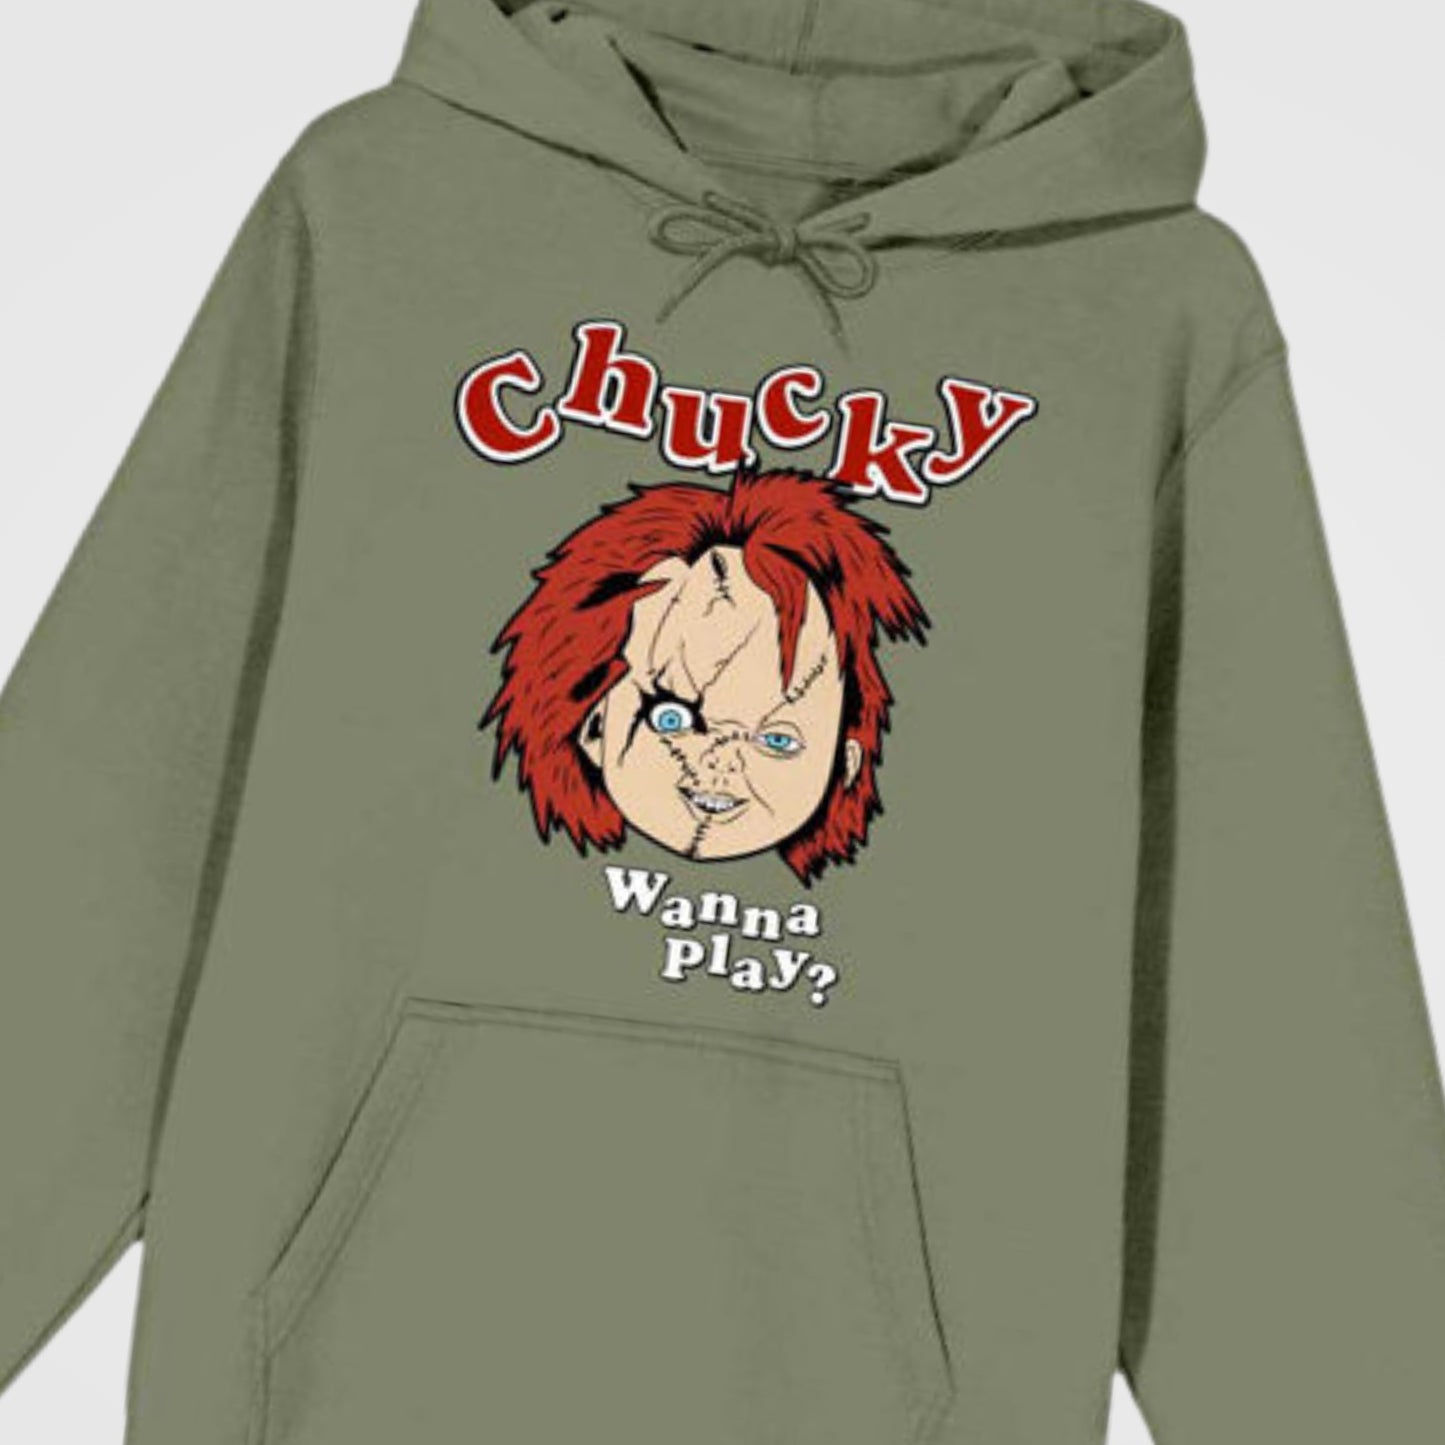 Chucky Face "Wanna Play?" (Child's Play) Pullover Hoodie Sweatshirt